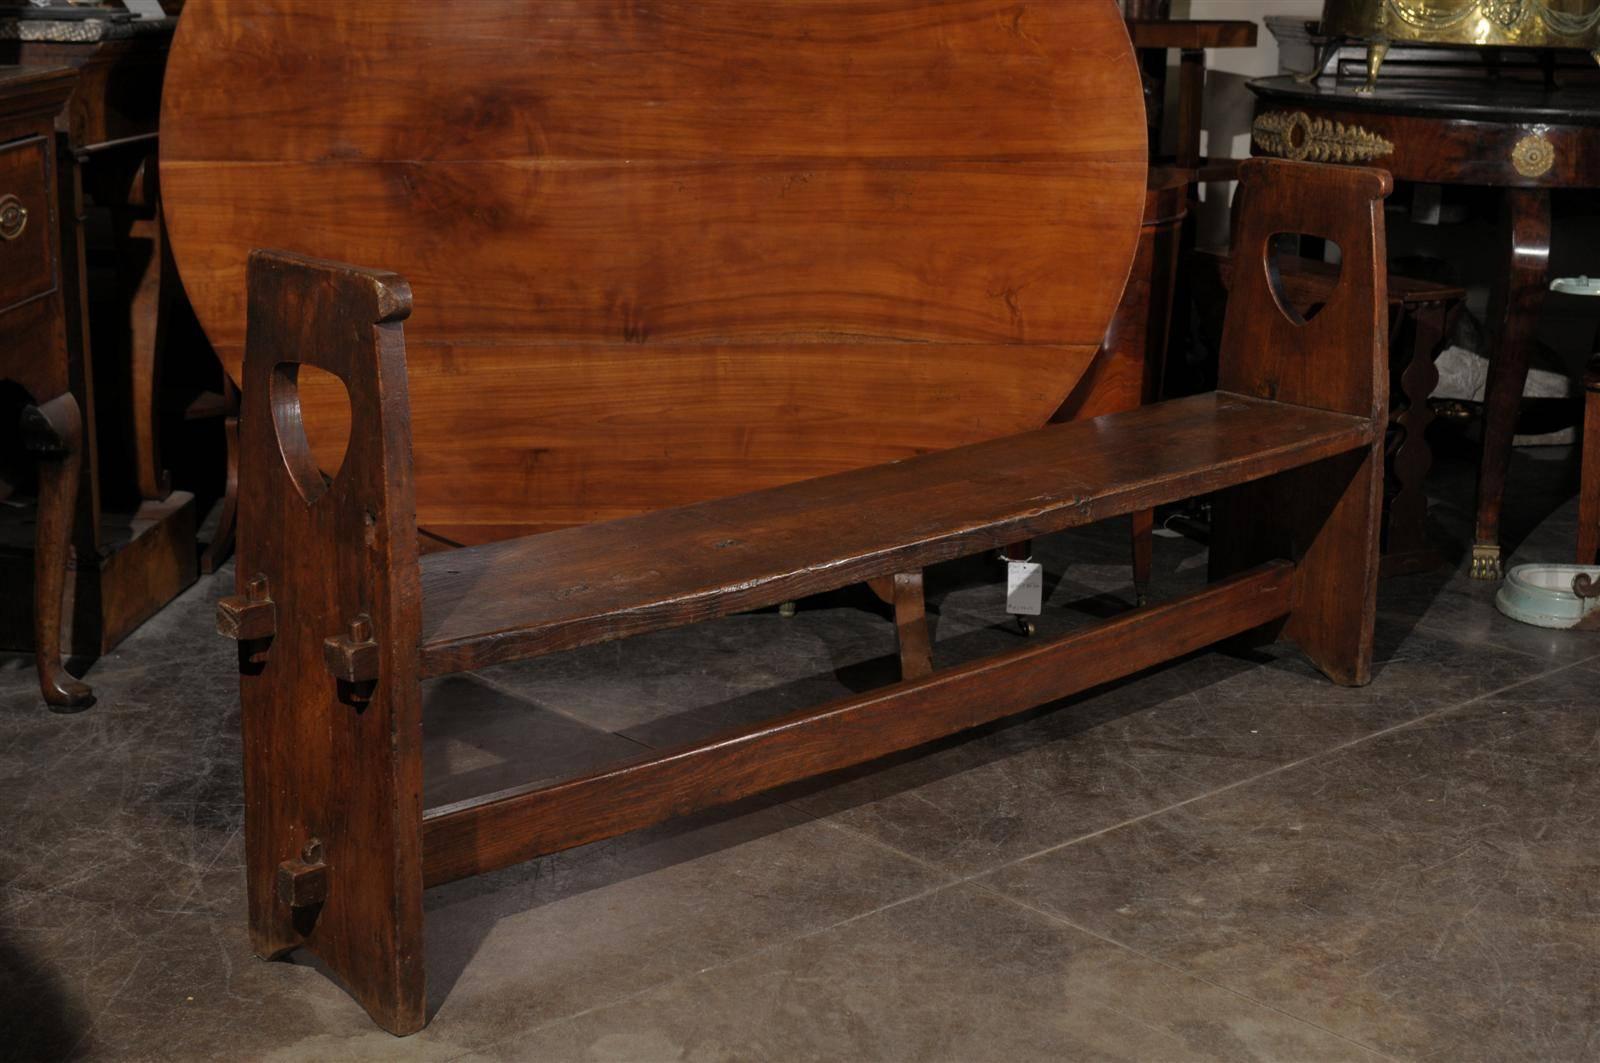 A long Italian wooden bench with stretcher and sides from the 19th century. This narrow wooden Tuscan bench from the early 19th century features a stretcher and a rectangular seat. This seat is inserted in groves in the sides, and has knuckles that